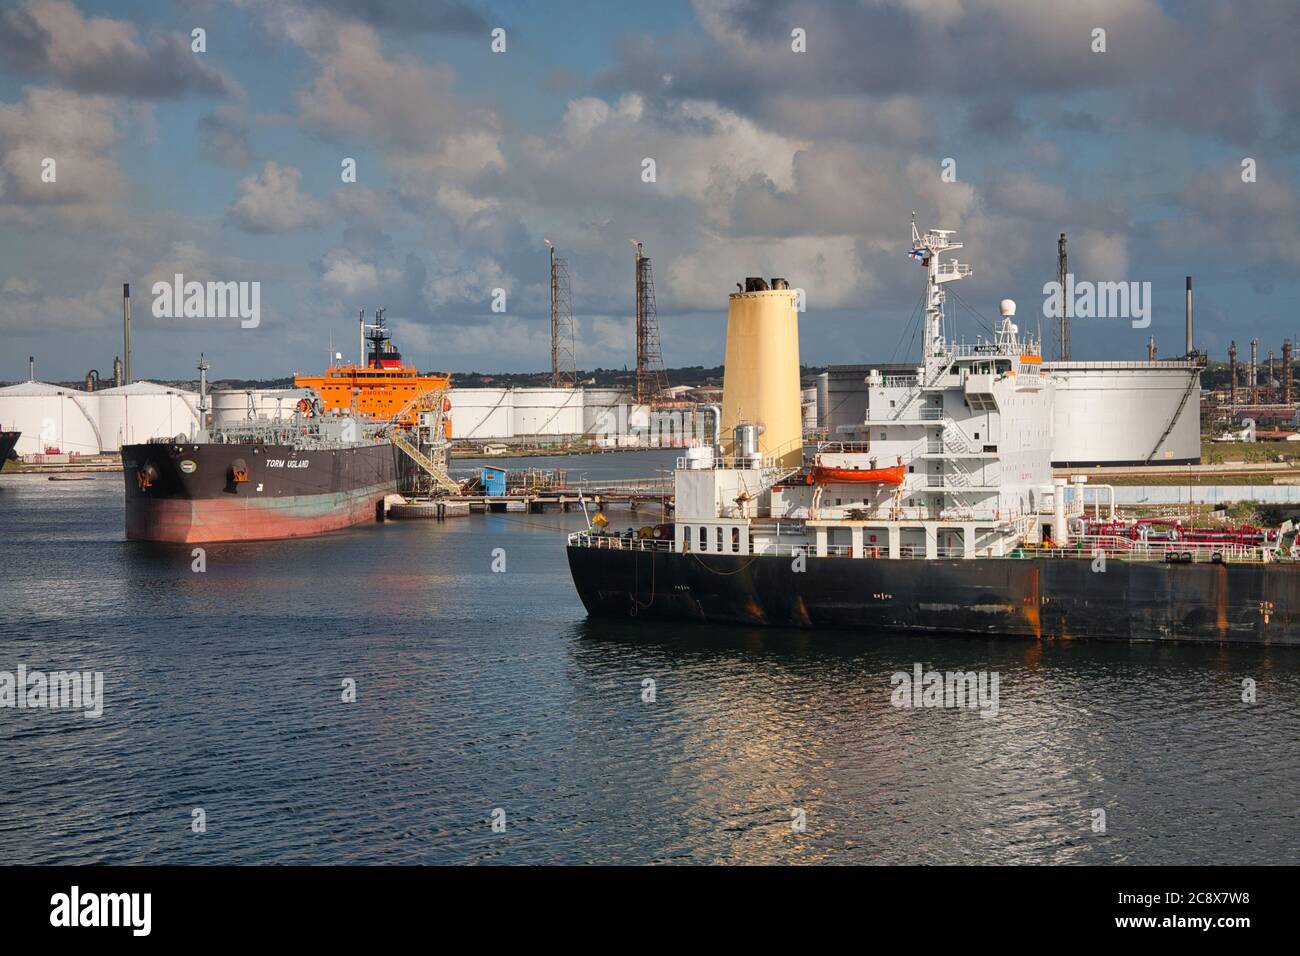 Two tankers moored at an oil refinery on the outskirts of Willemstad, Curacao, The Caribbean Stock Photo